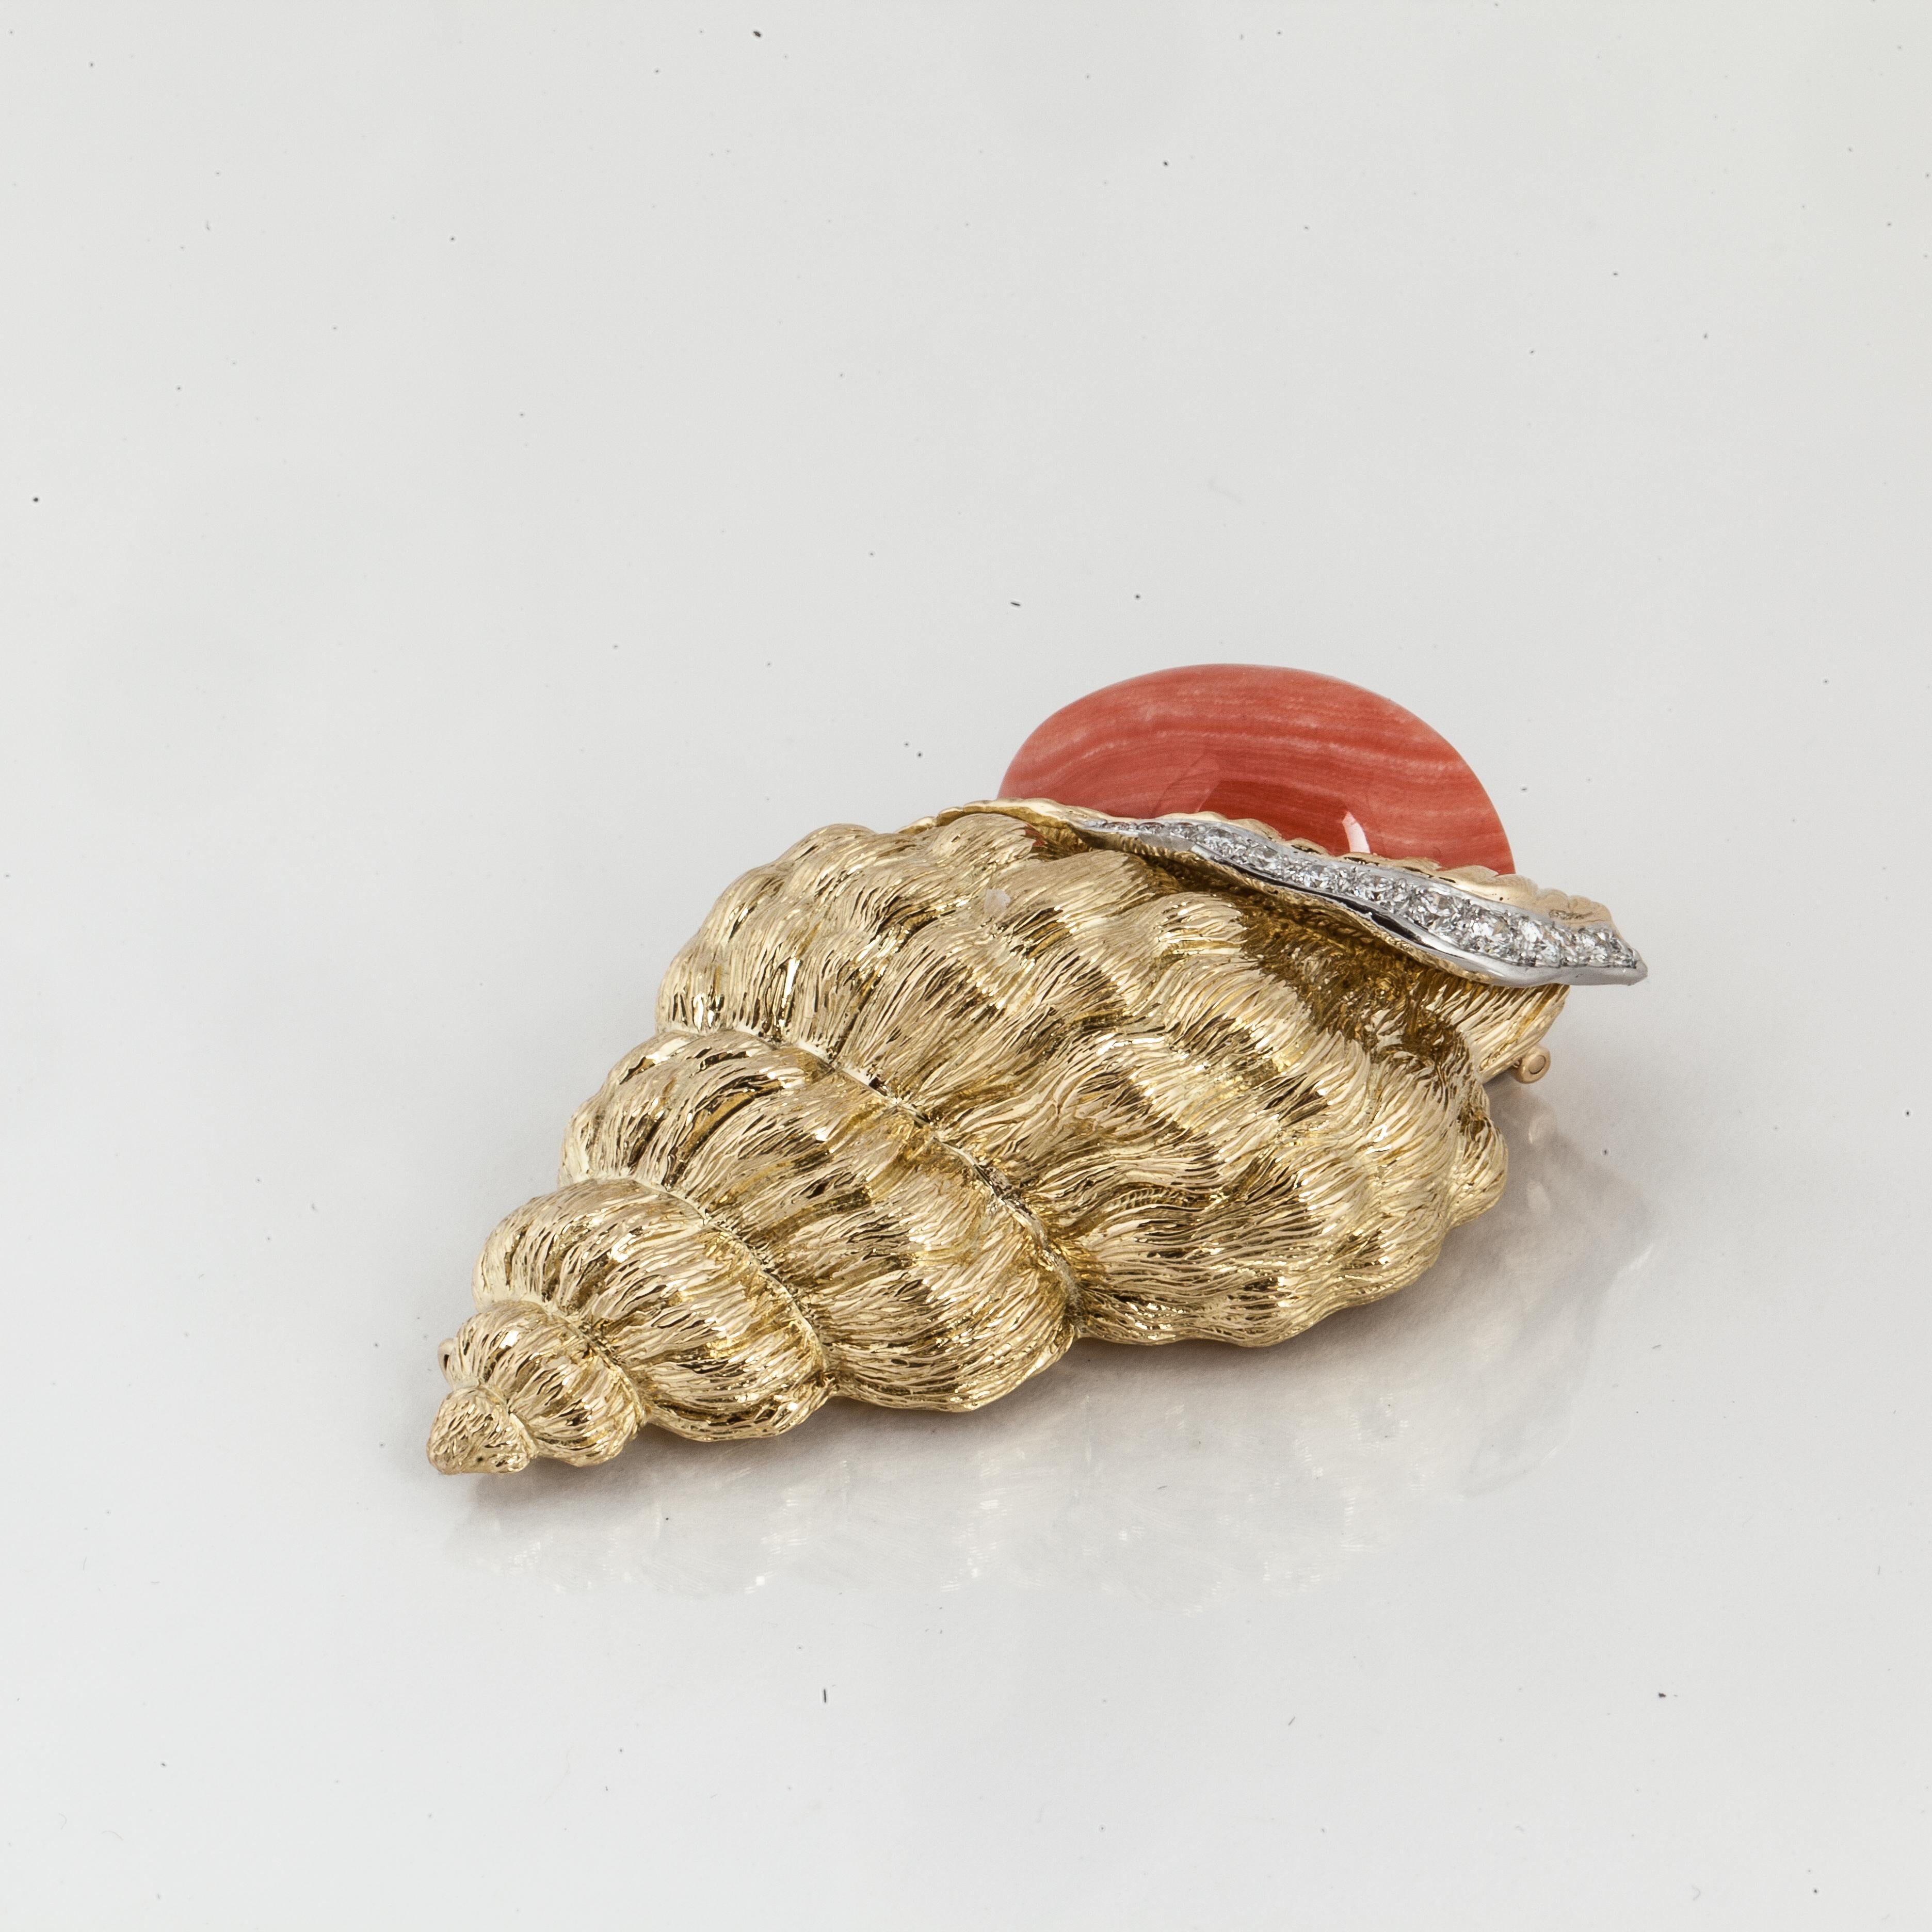 David Webb brooch depicting a shell in 18K yellow gold with coral and diamonds.  It is marked 